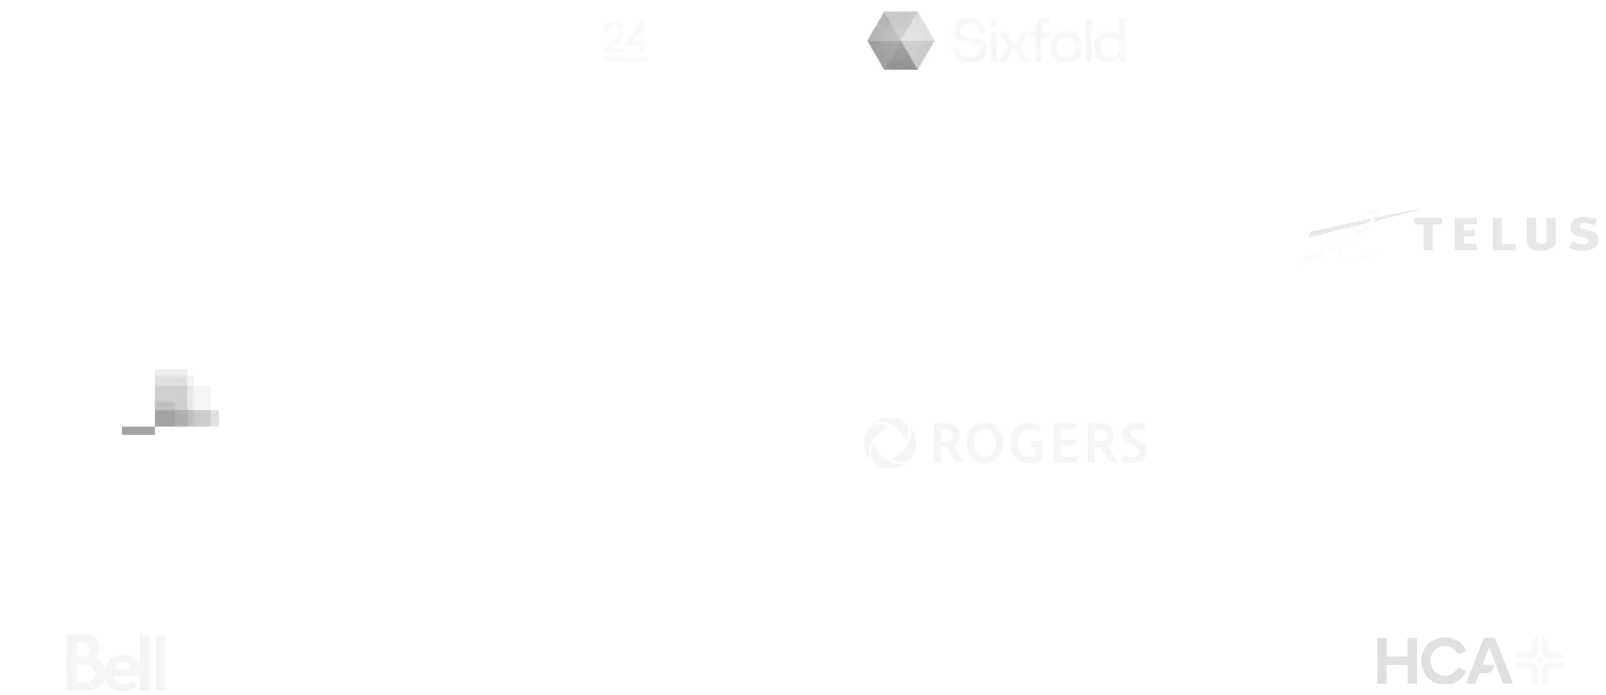 client logos changed